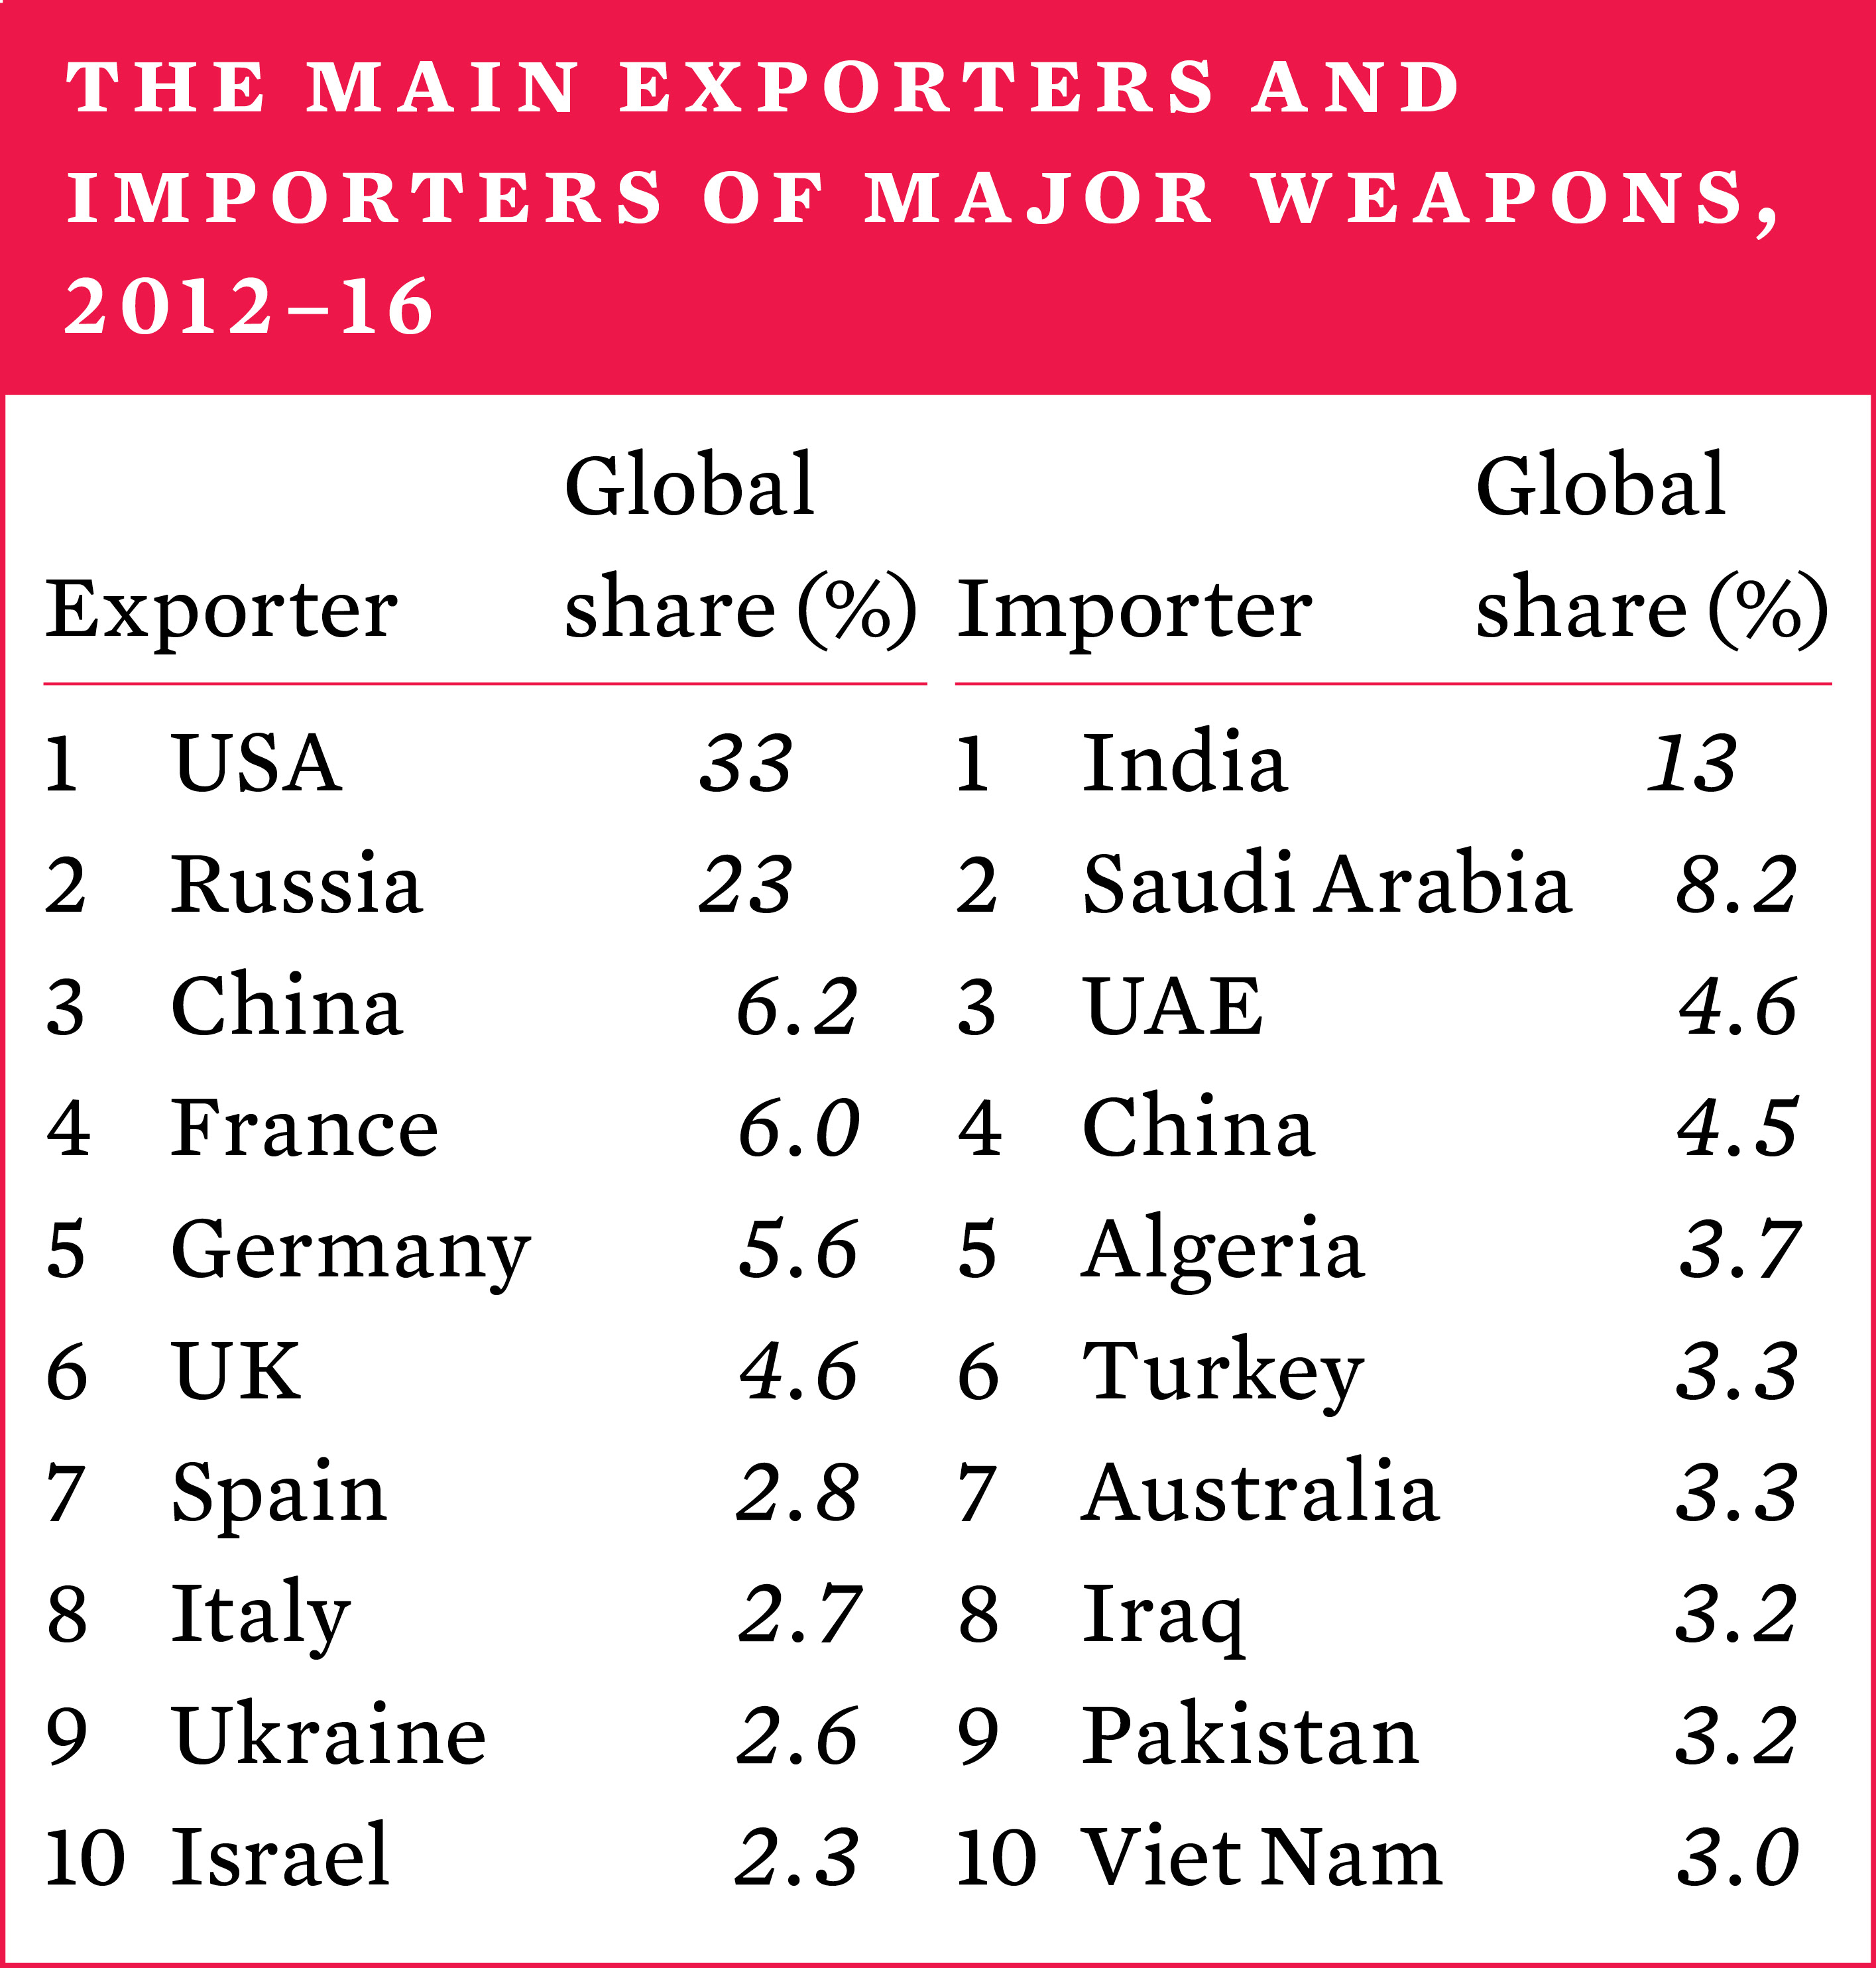 The main exporters and importers of major weapons, 2012-16